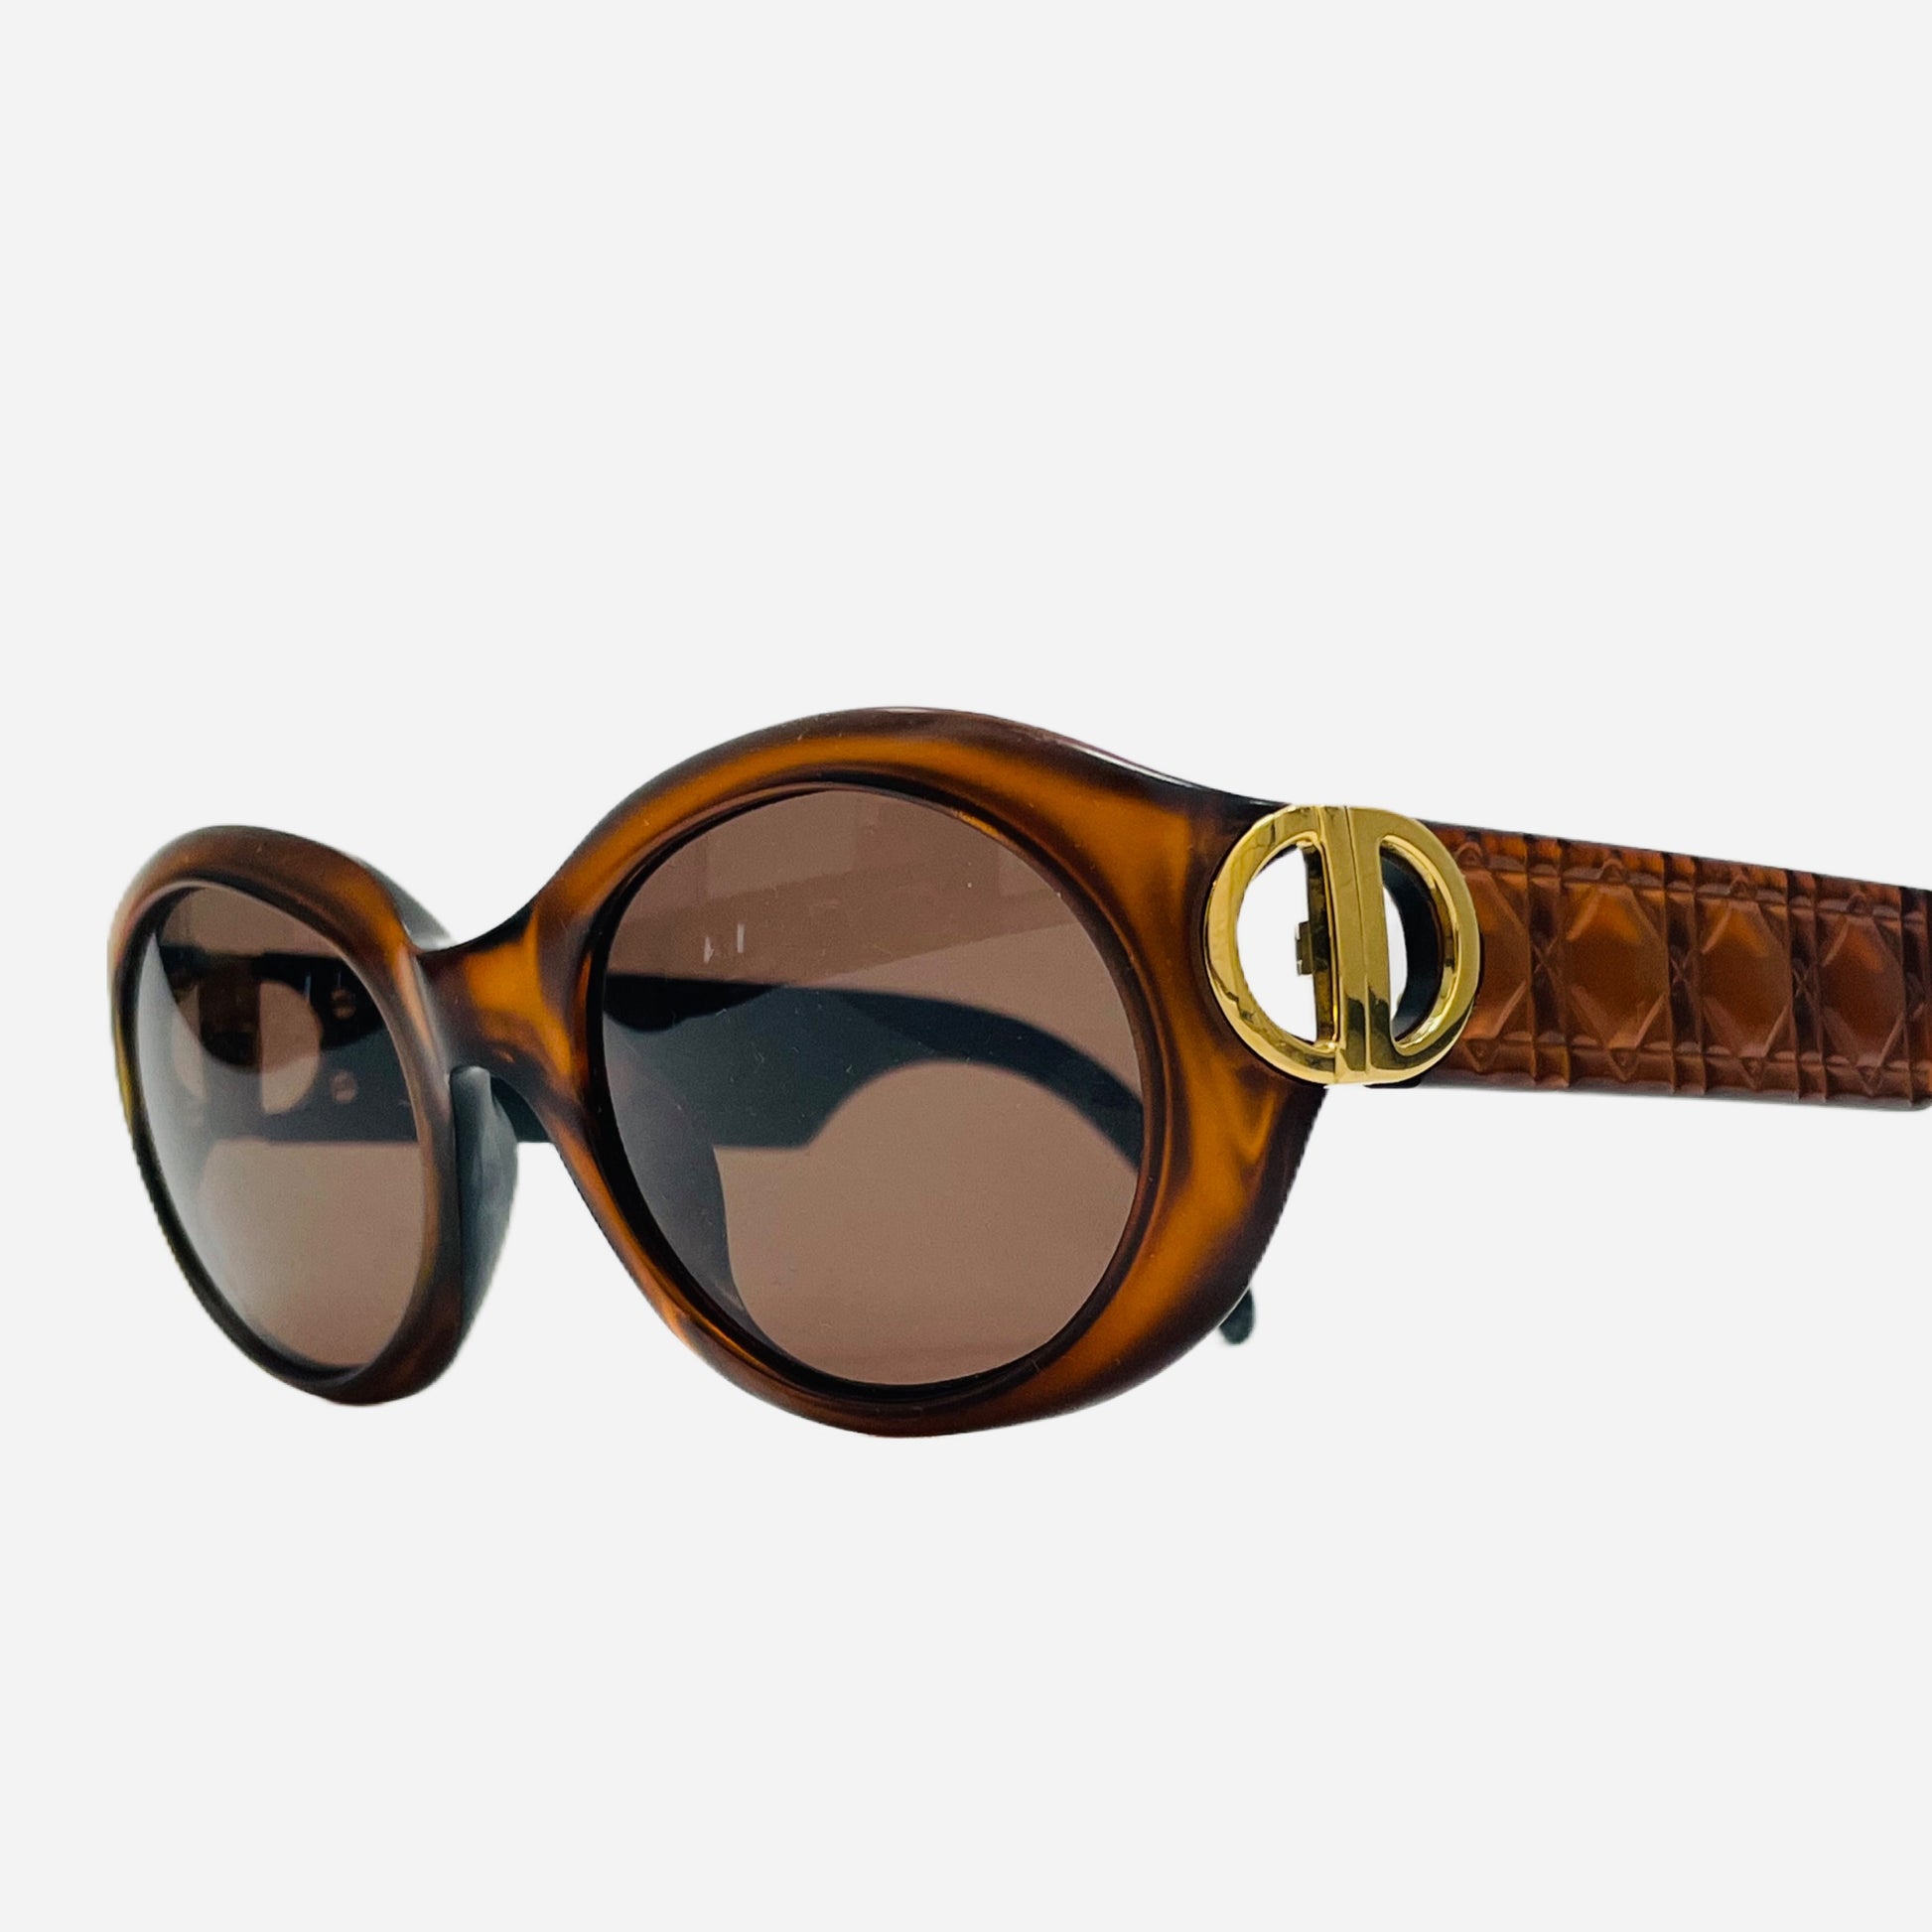 Vintage-Christian-Dior-Diorama-Sonnenbrille-Sunglasses-the-seekers-side-2